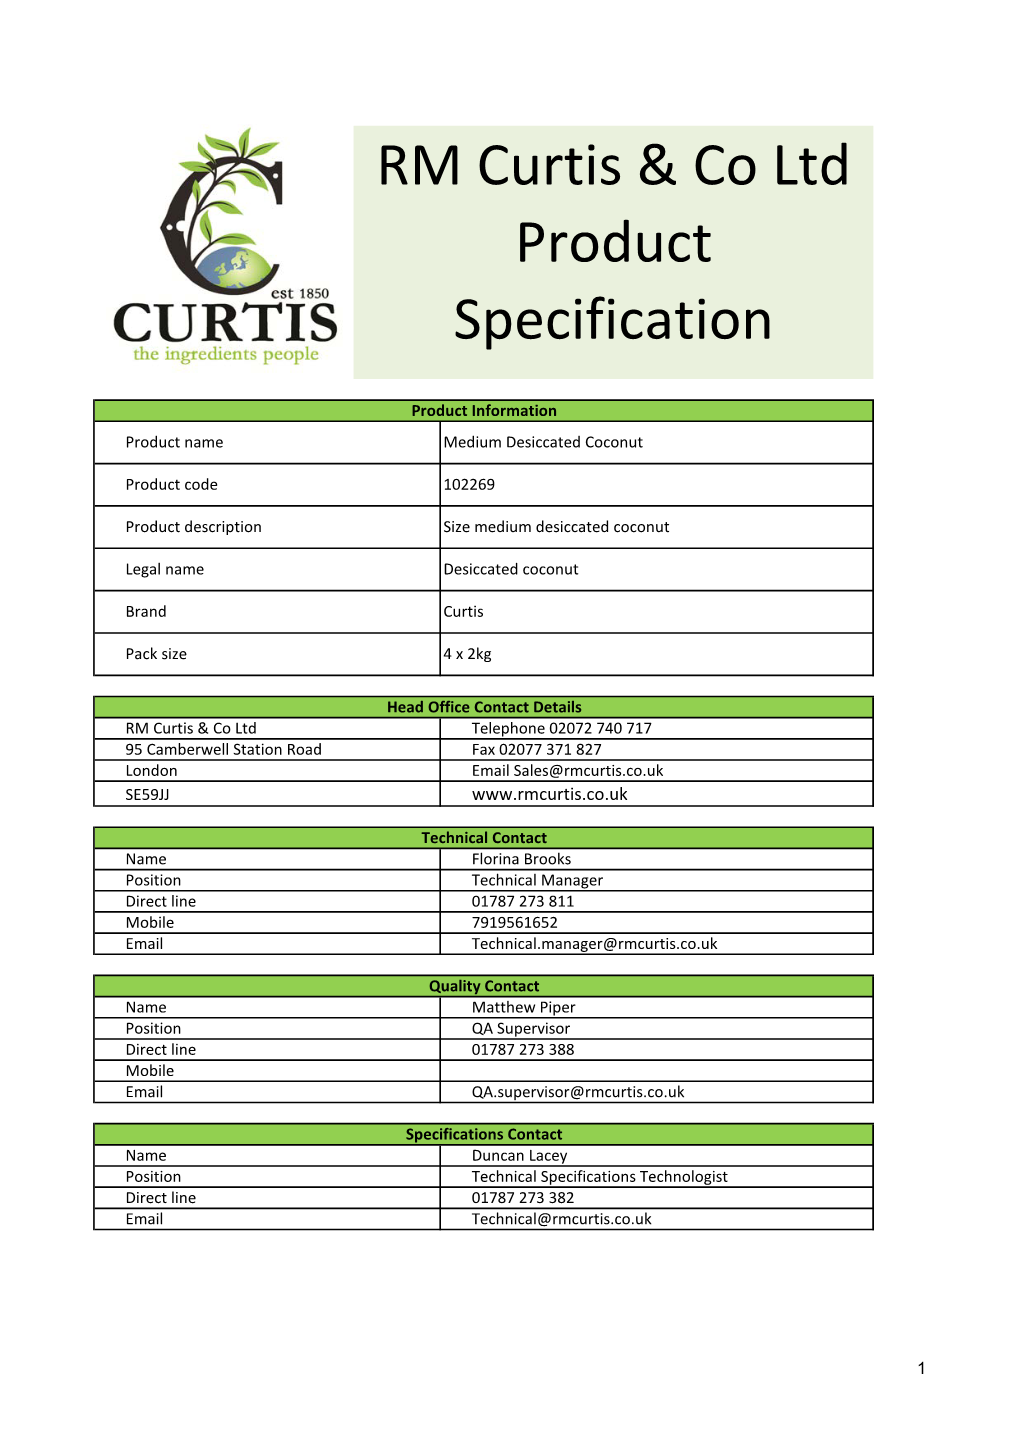 RM Curtis & Co Ltd Product Specification